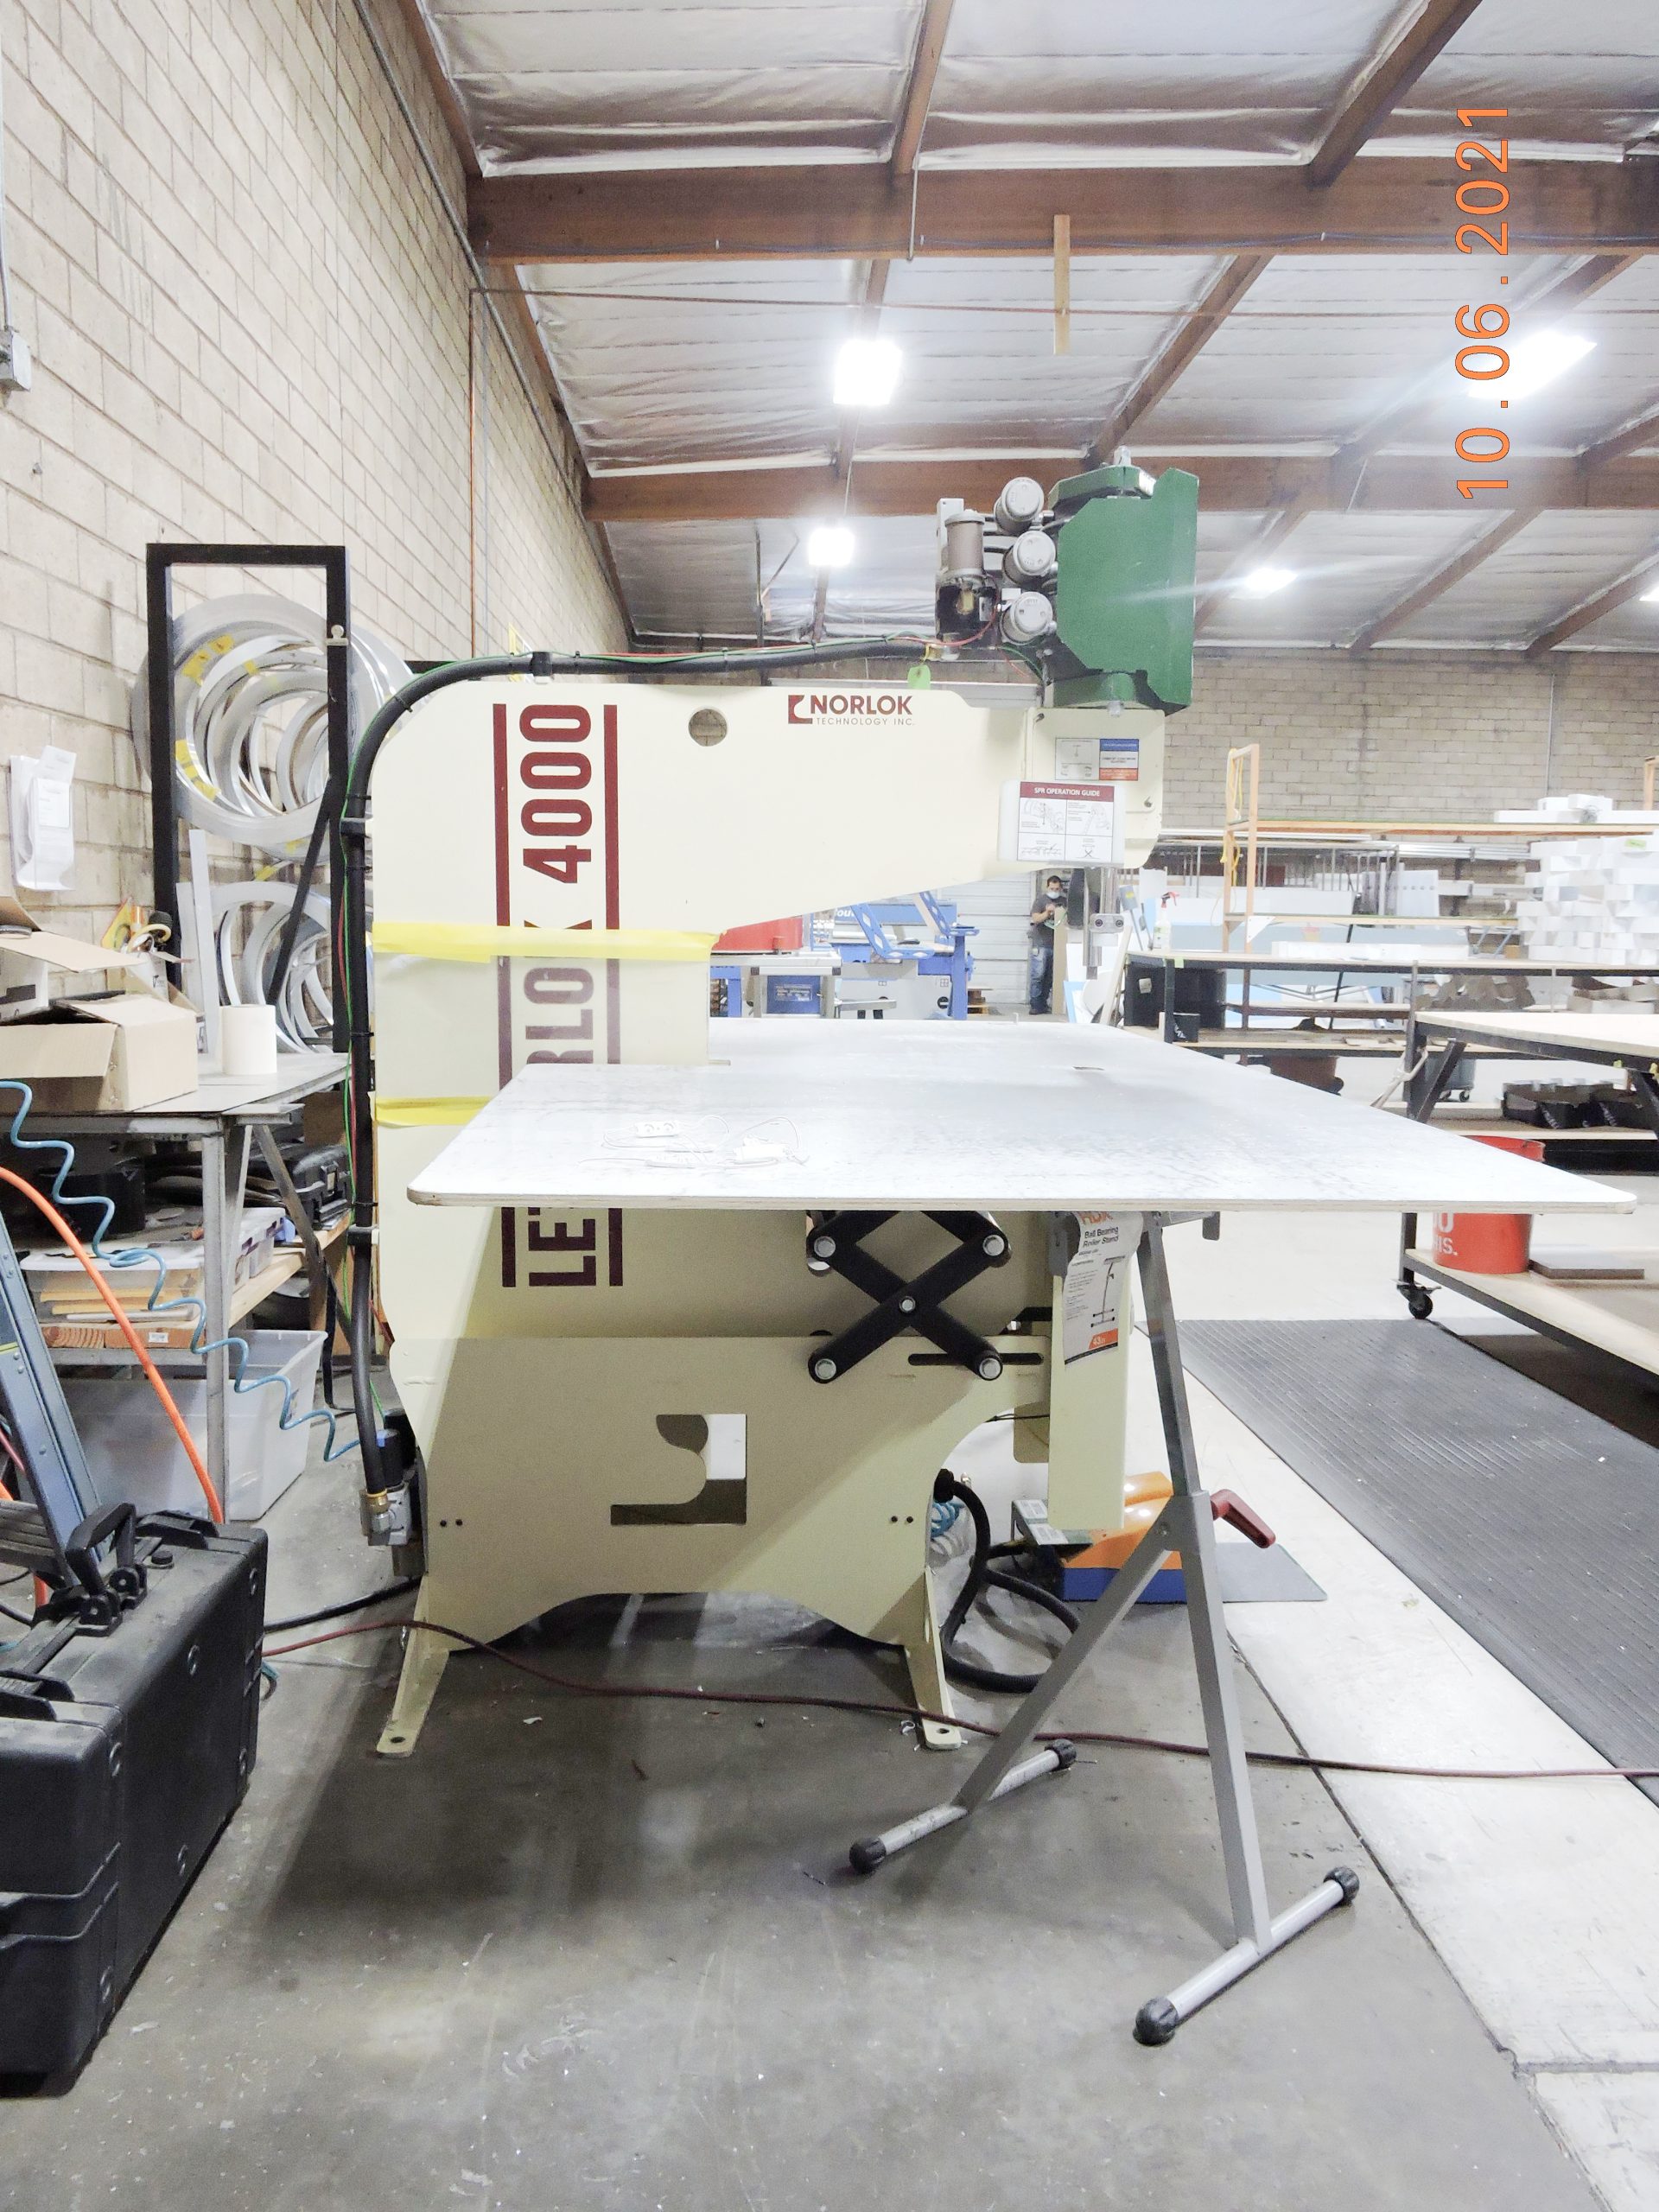 Equipment Lot: HS – 25 Series CNC Router, Fusion Automatic Channel Letter Machine, Letter Lok 4000 Machine & Supplies (used) Item # UE-120221A (California)